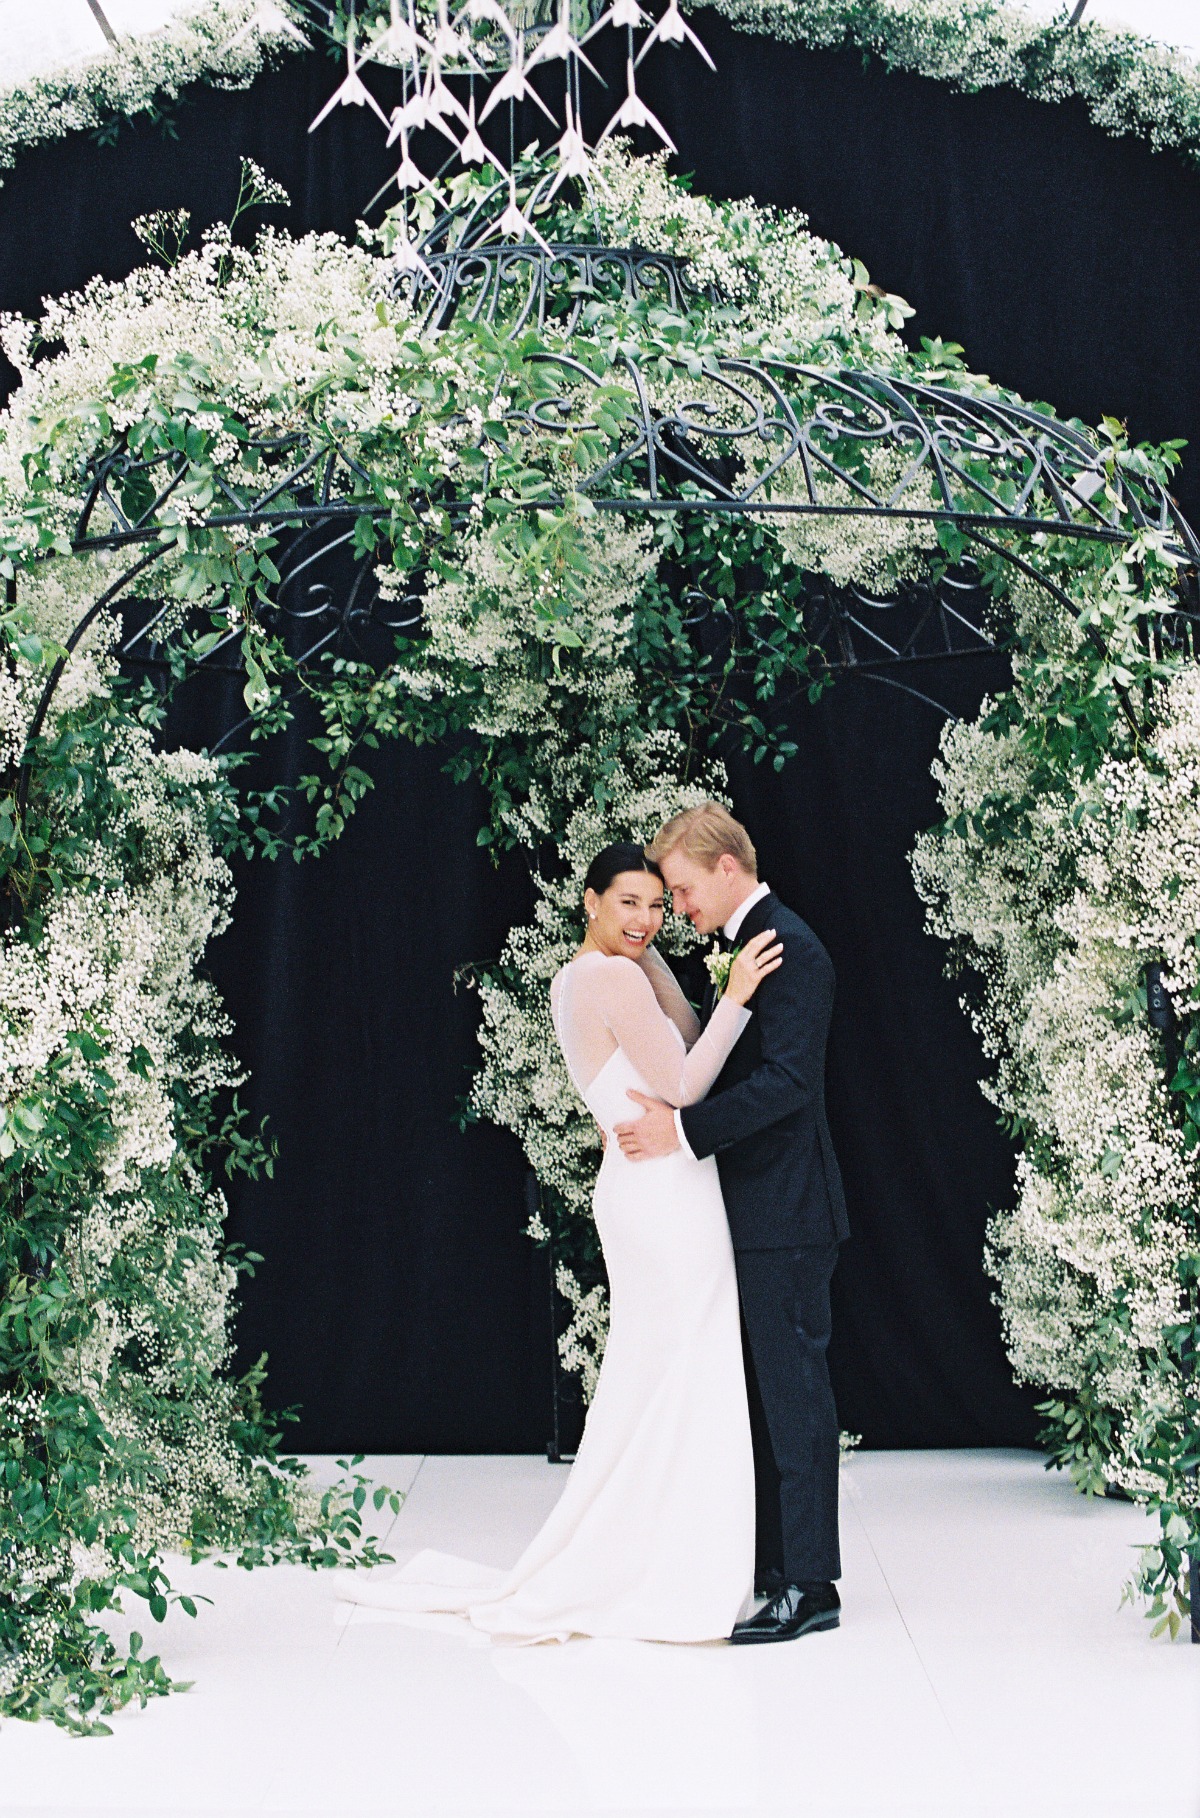 Vienna Wedding with an Imperial Vibe (and a Jaw-Dropping Dress!)